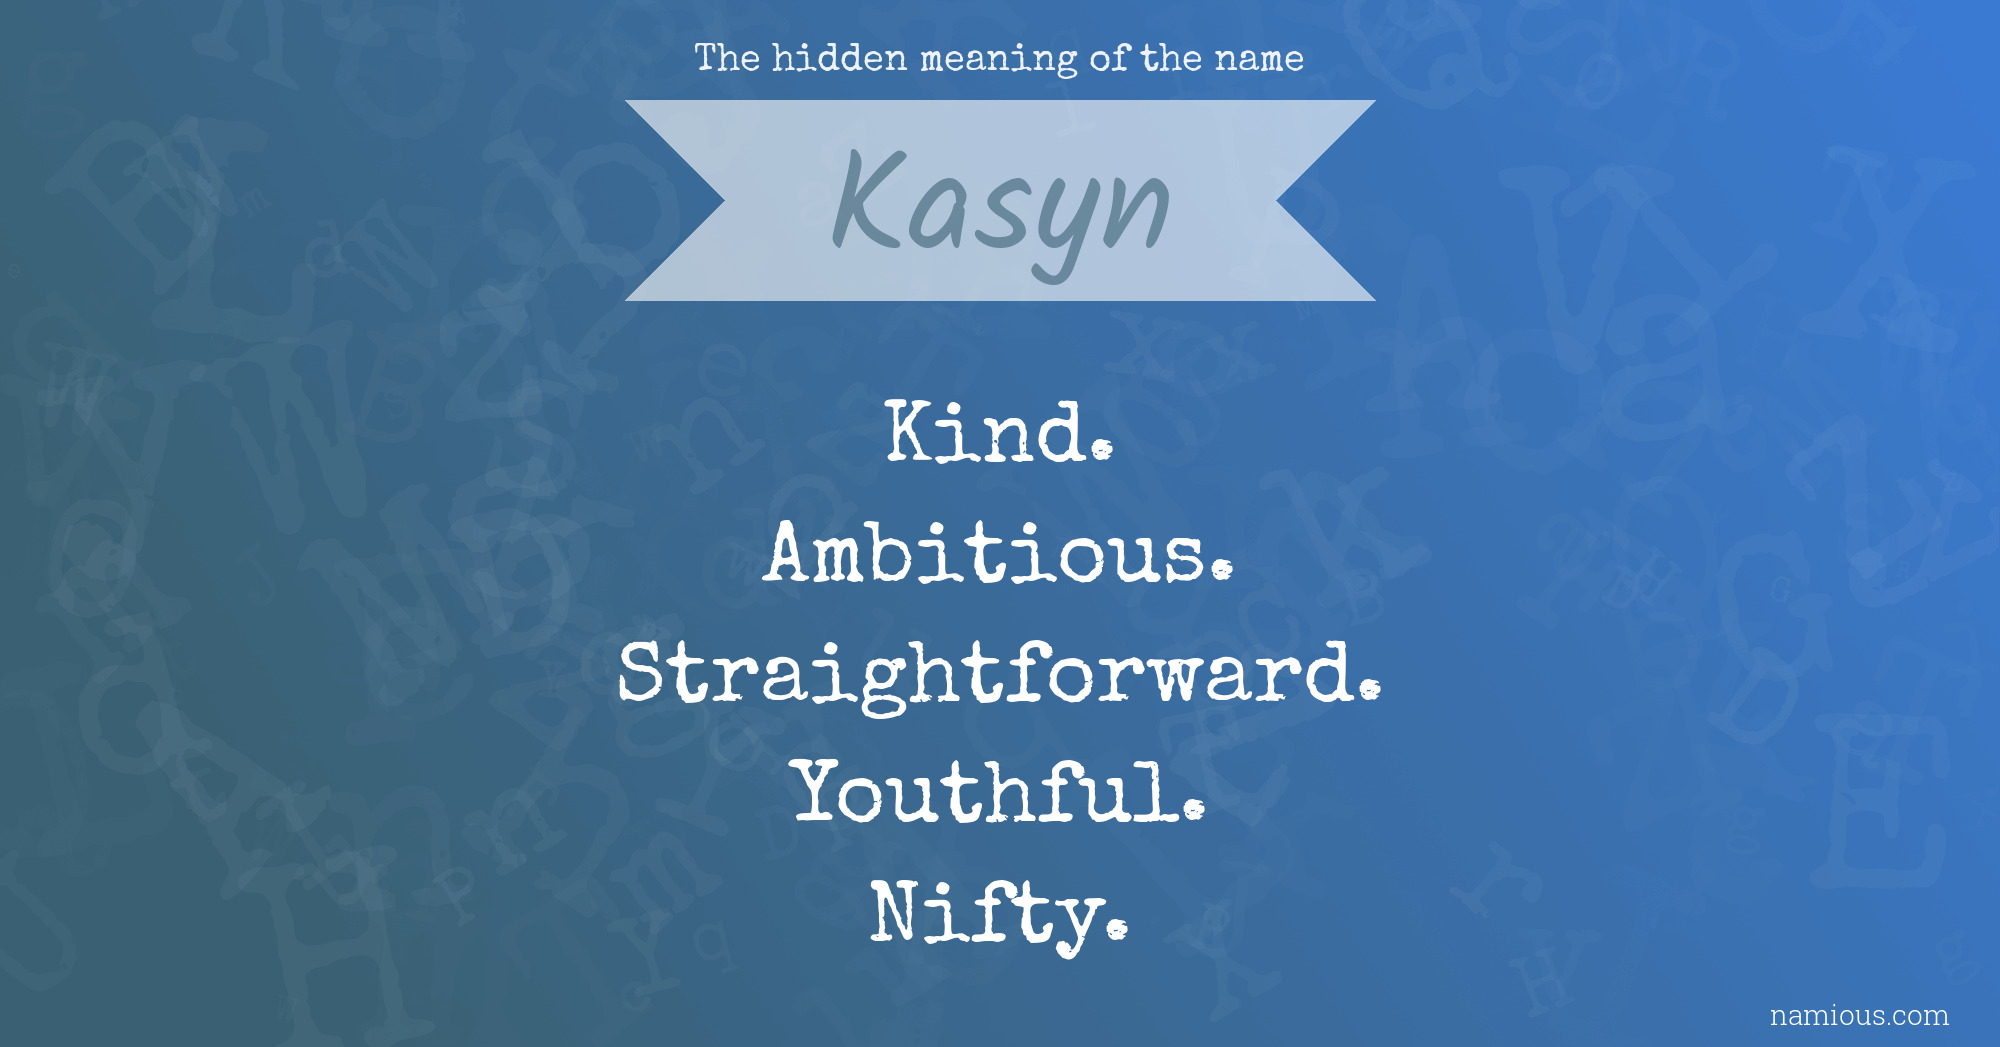 The hidden meaning of the name Kasyn